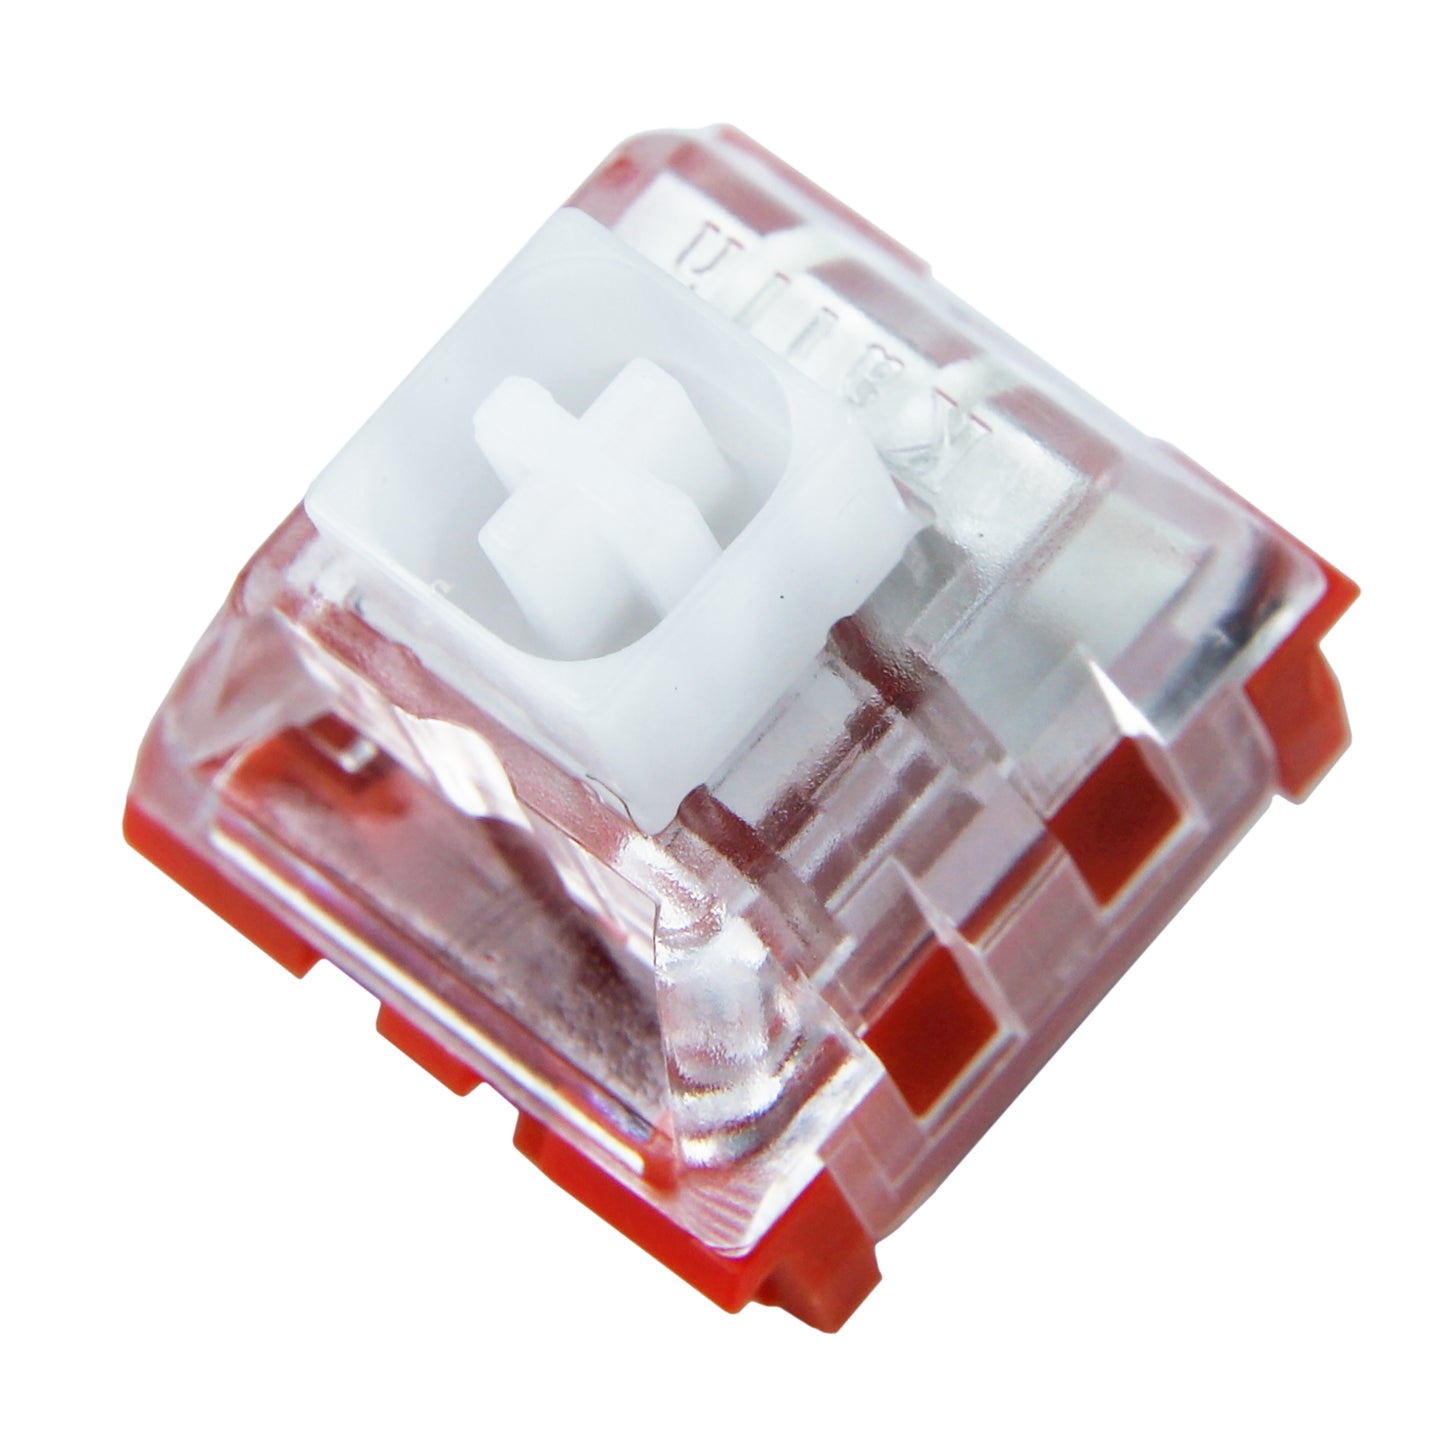 Kailh Pro Box Red(35g SMD Linear Switches/Dustproof)